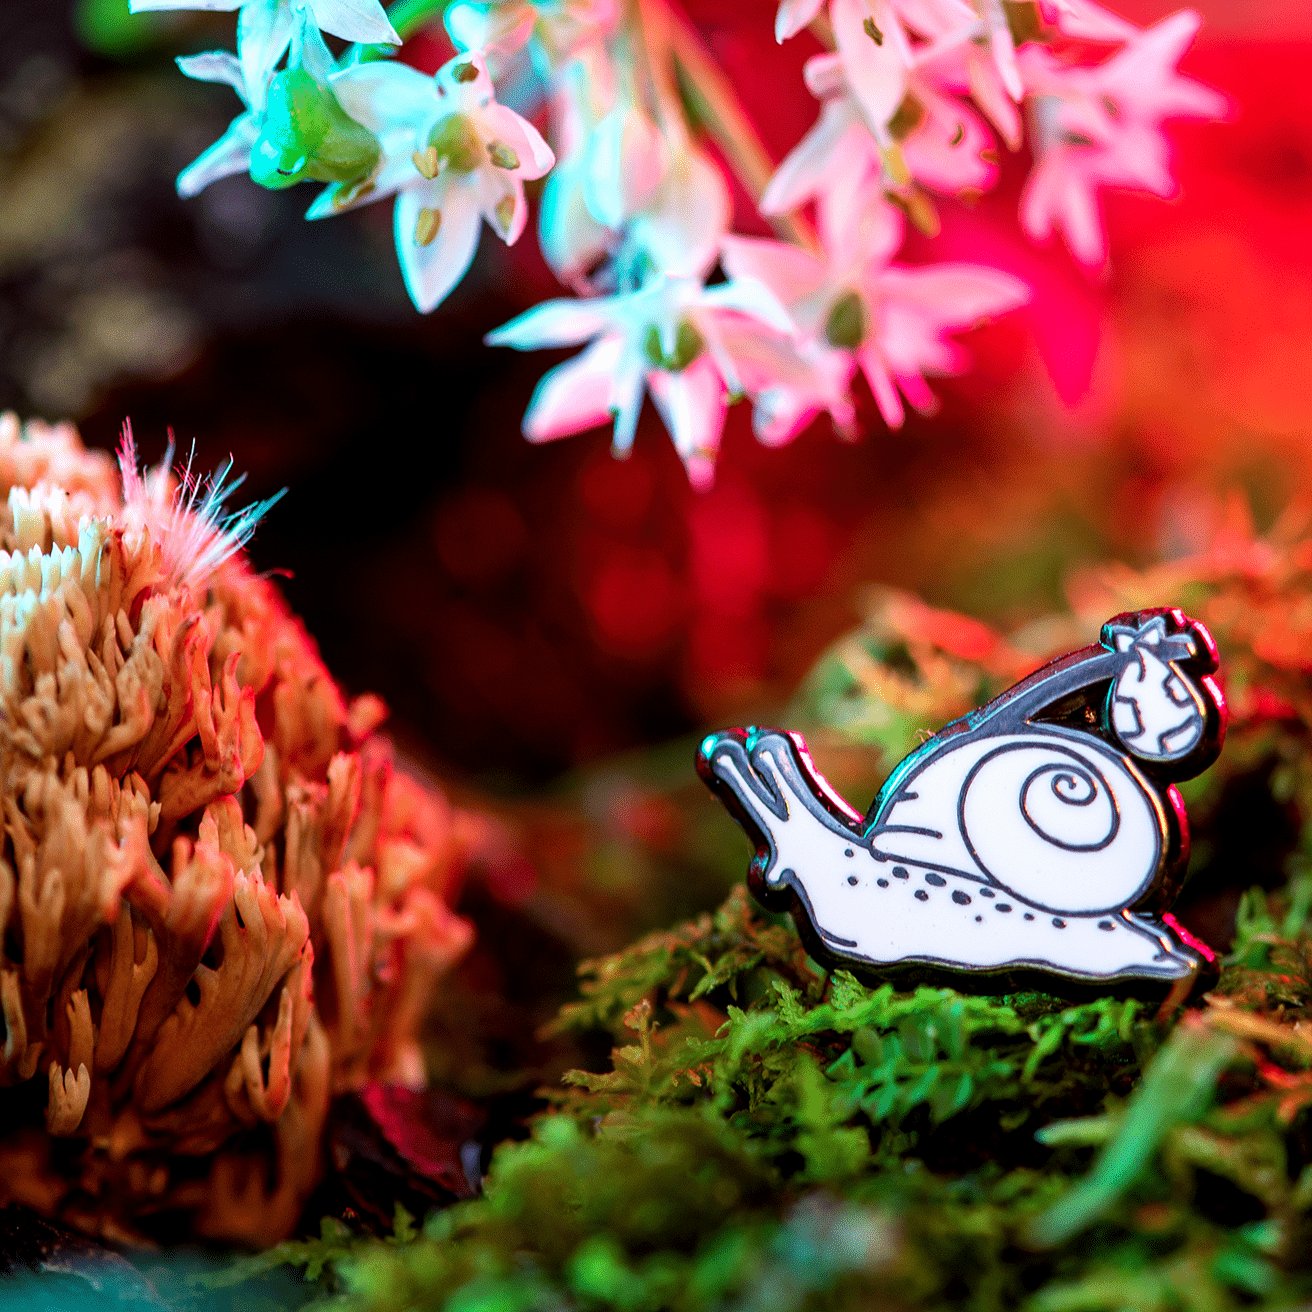 Rover the Snail Mini Pin by The Roving House, featuring a hobo or runaway snail with a bindle.